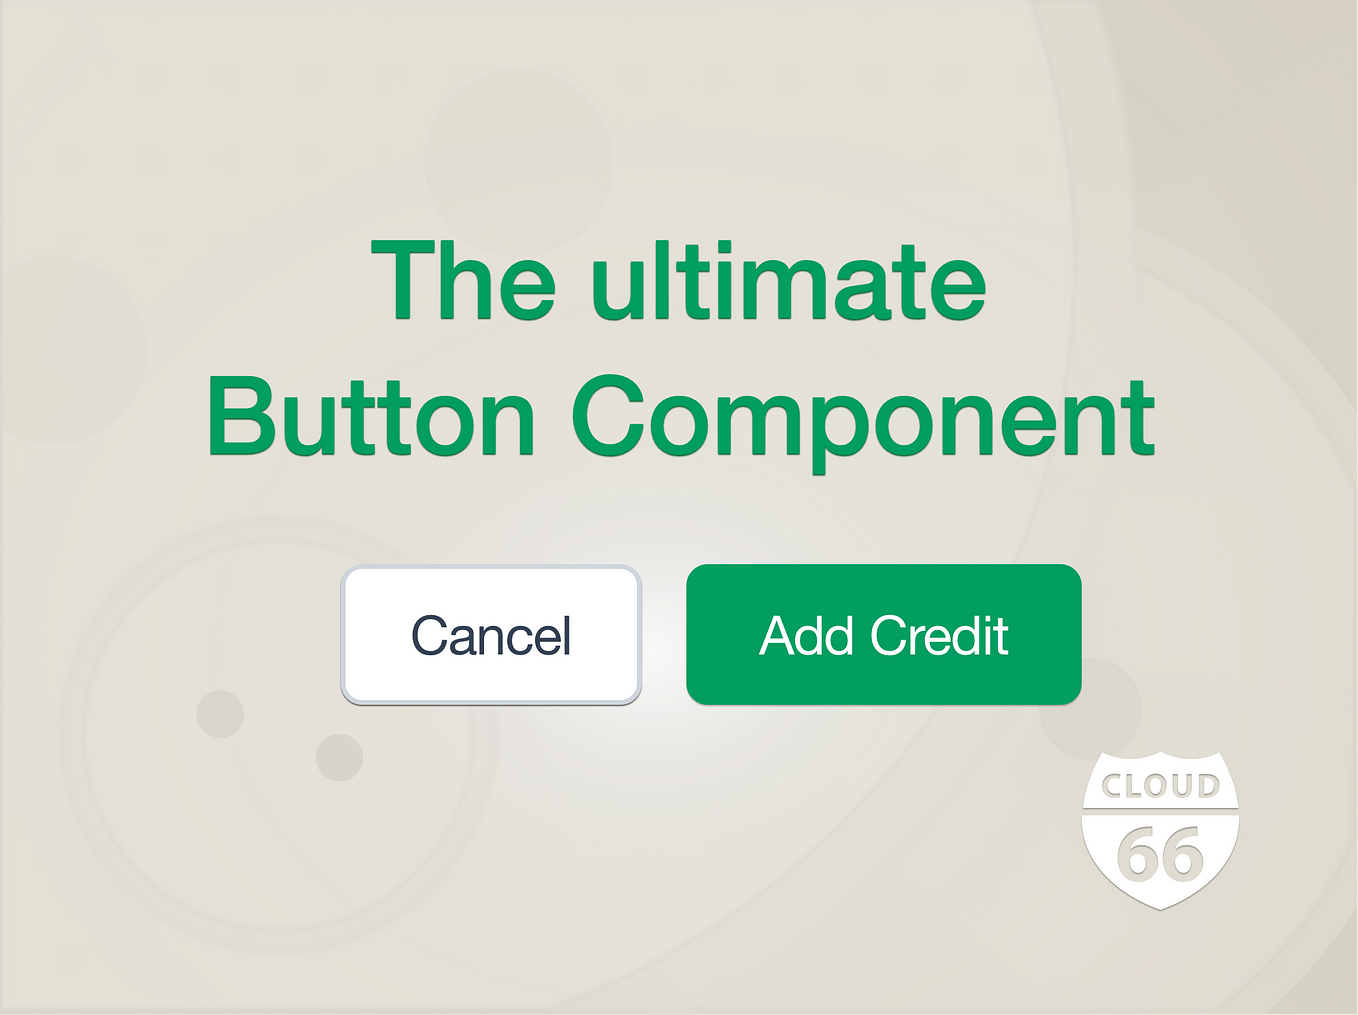 The ultimate Button Component